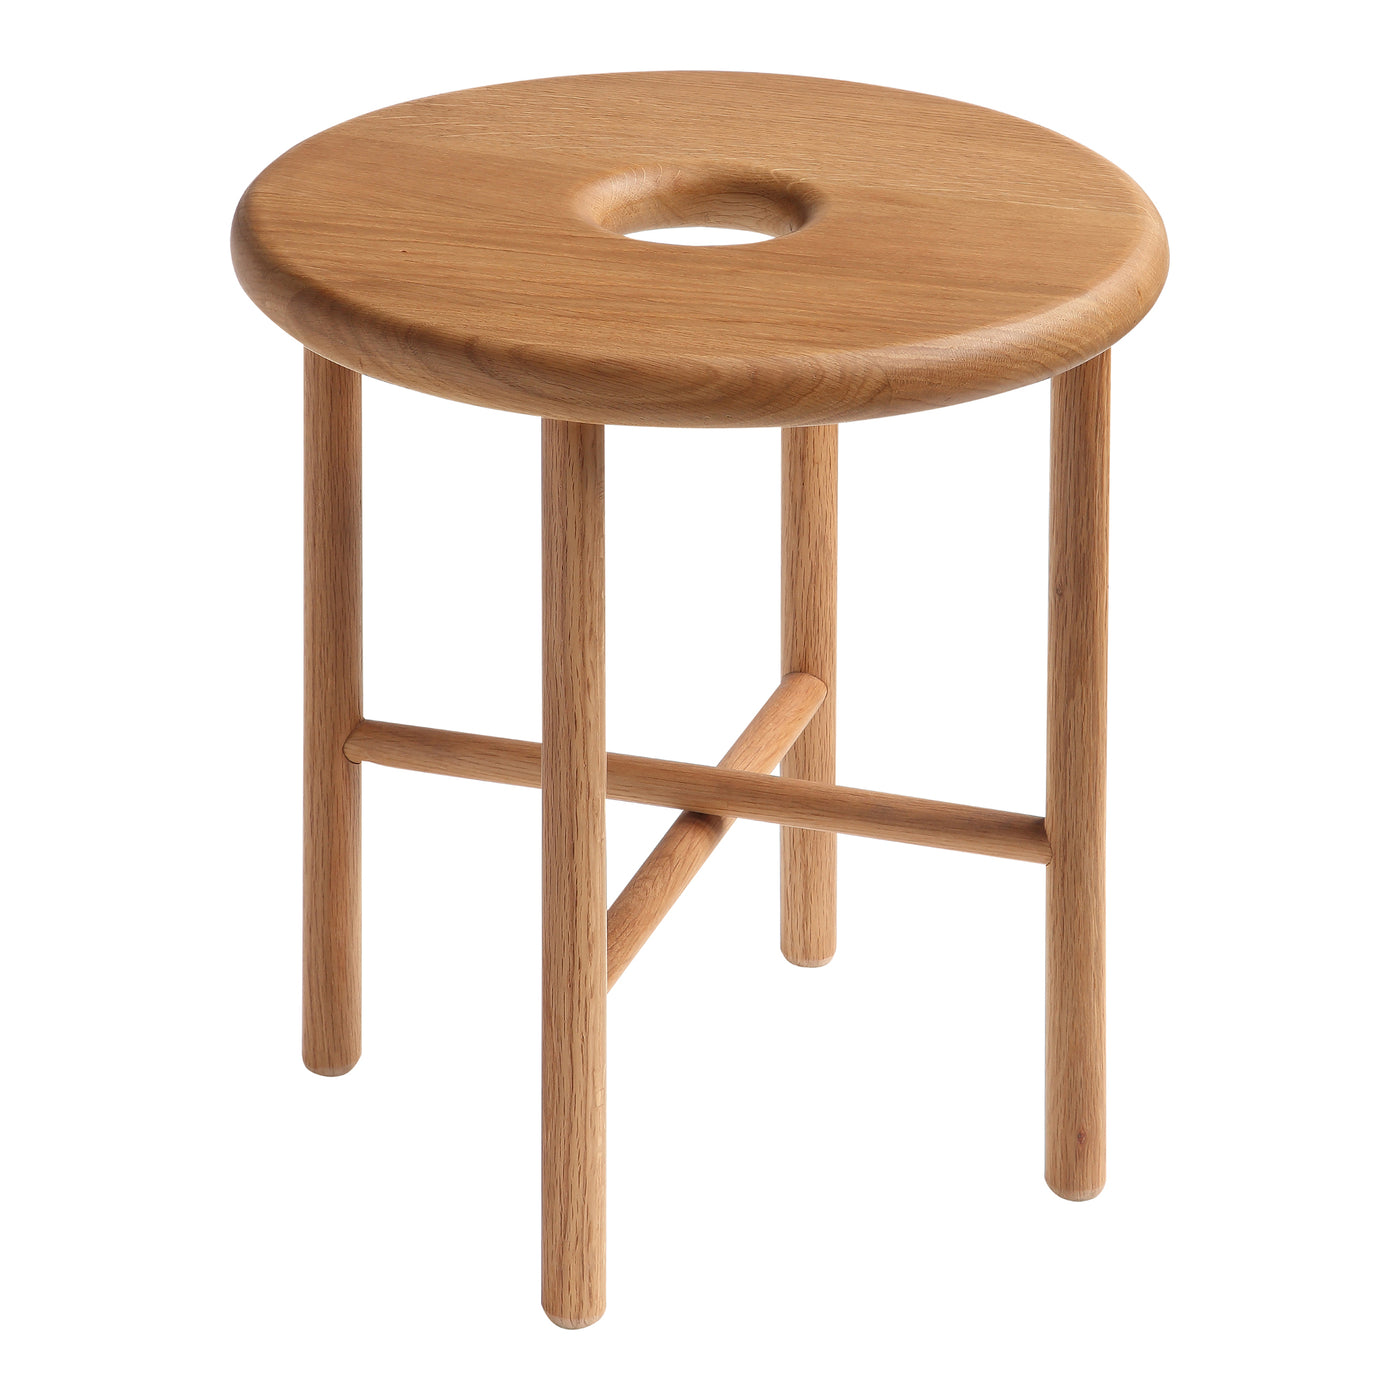 Curved, compact and cool. This is the Namba stool, named after the bustling streets of Osaka, Japan, a famous district als...